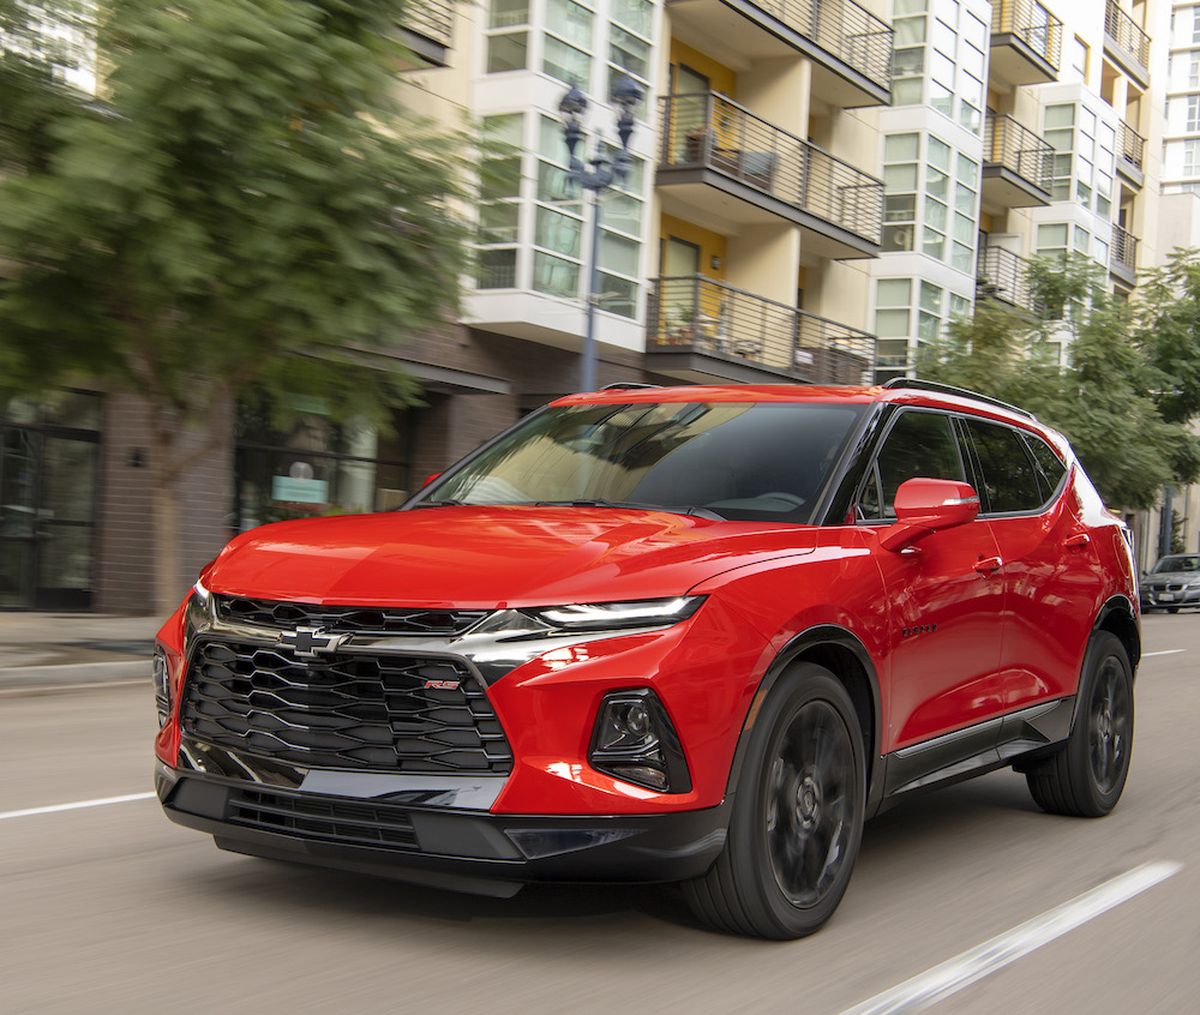 The new Blazer is a stylish, five-person CUV that slots between the Equinox and the Traverse. It offers engaging dynamics and a choice of three engines. I (Chevrolet)